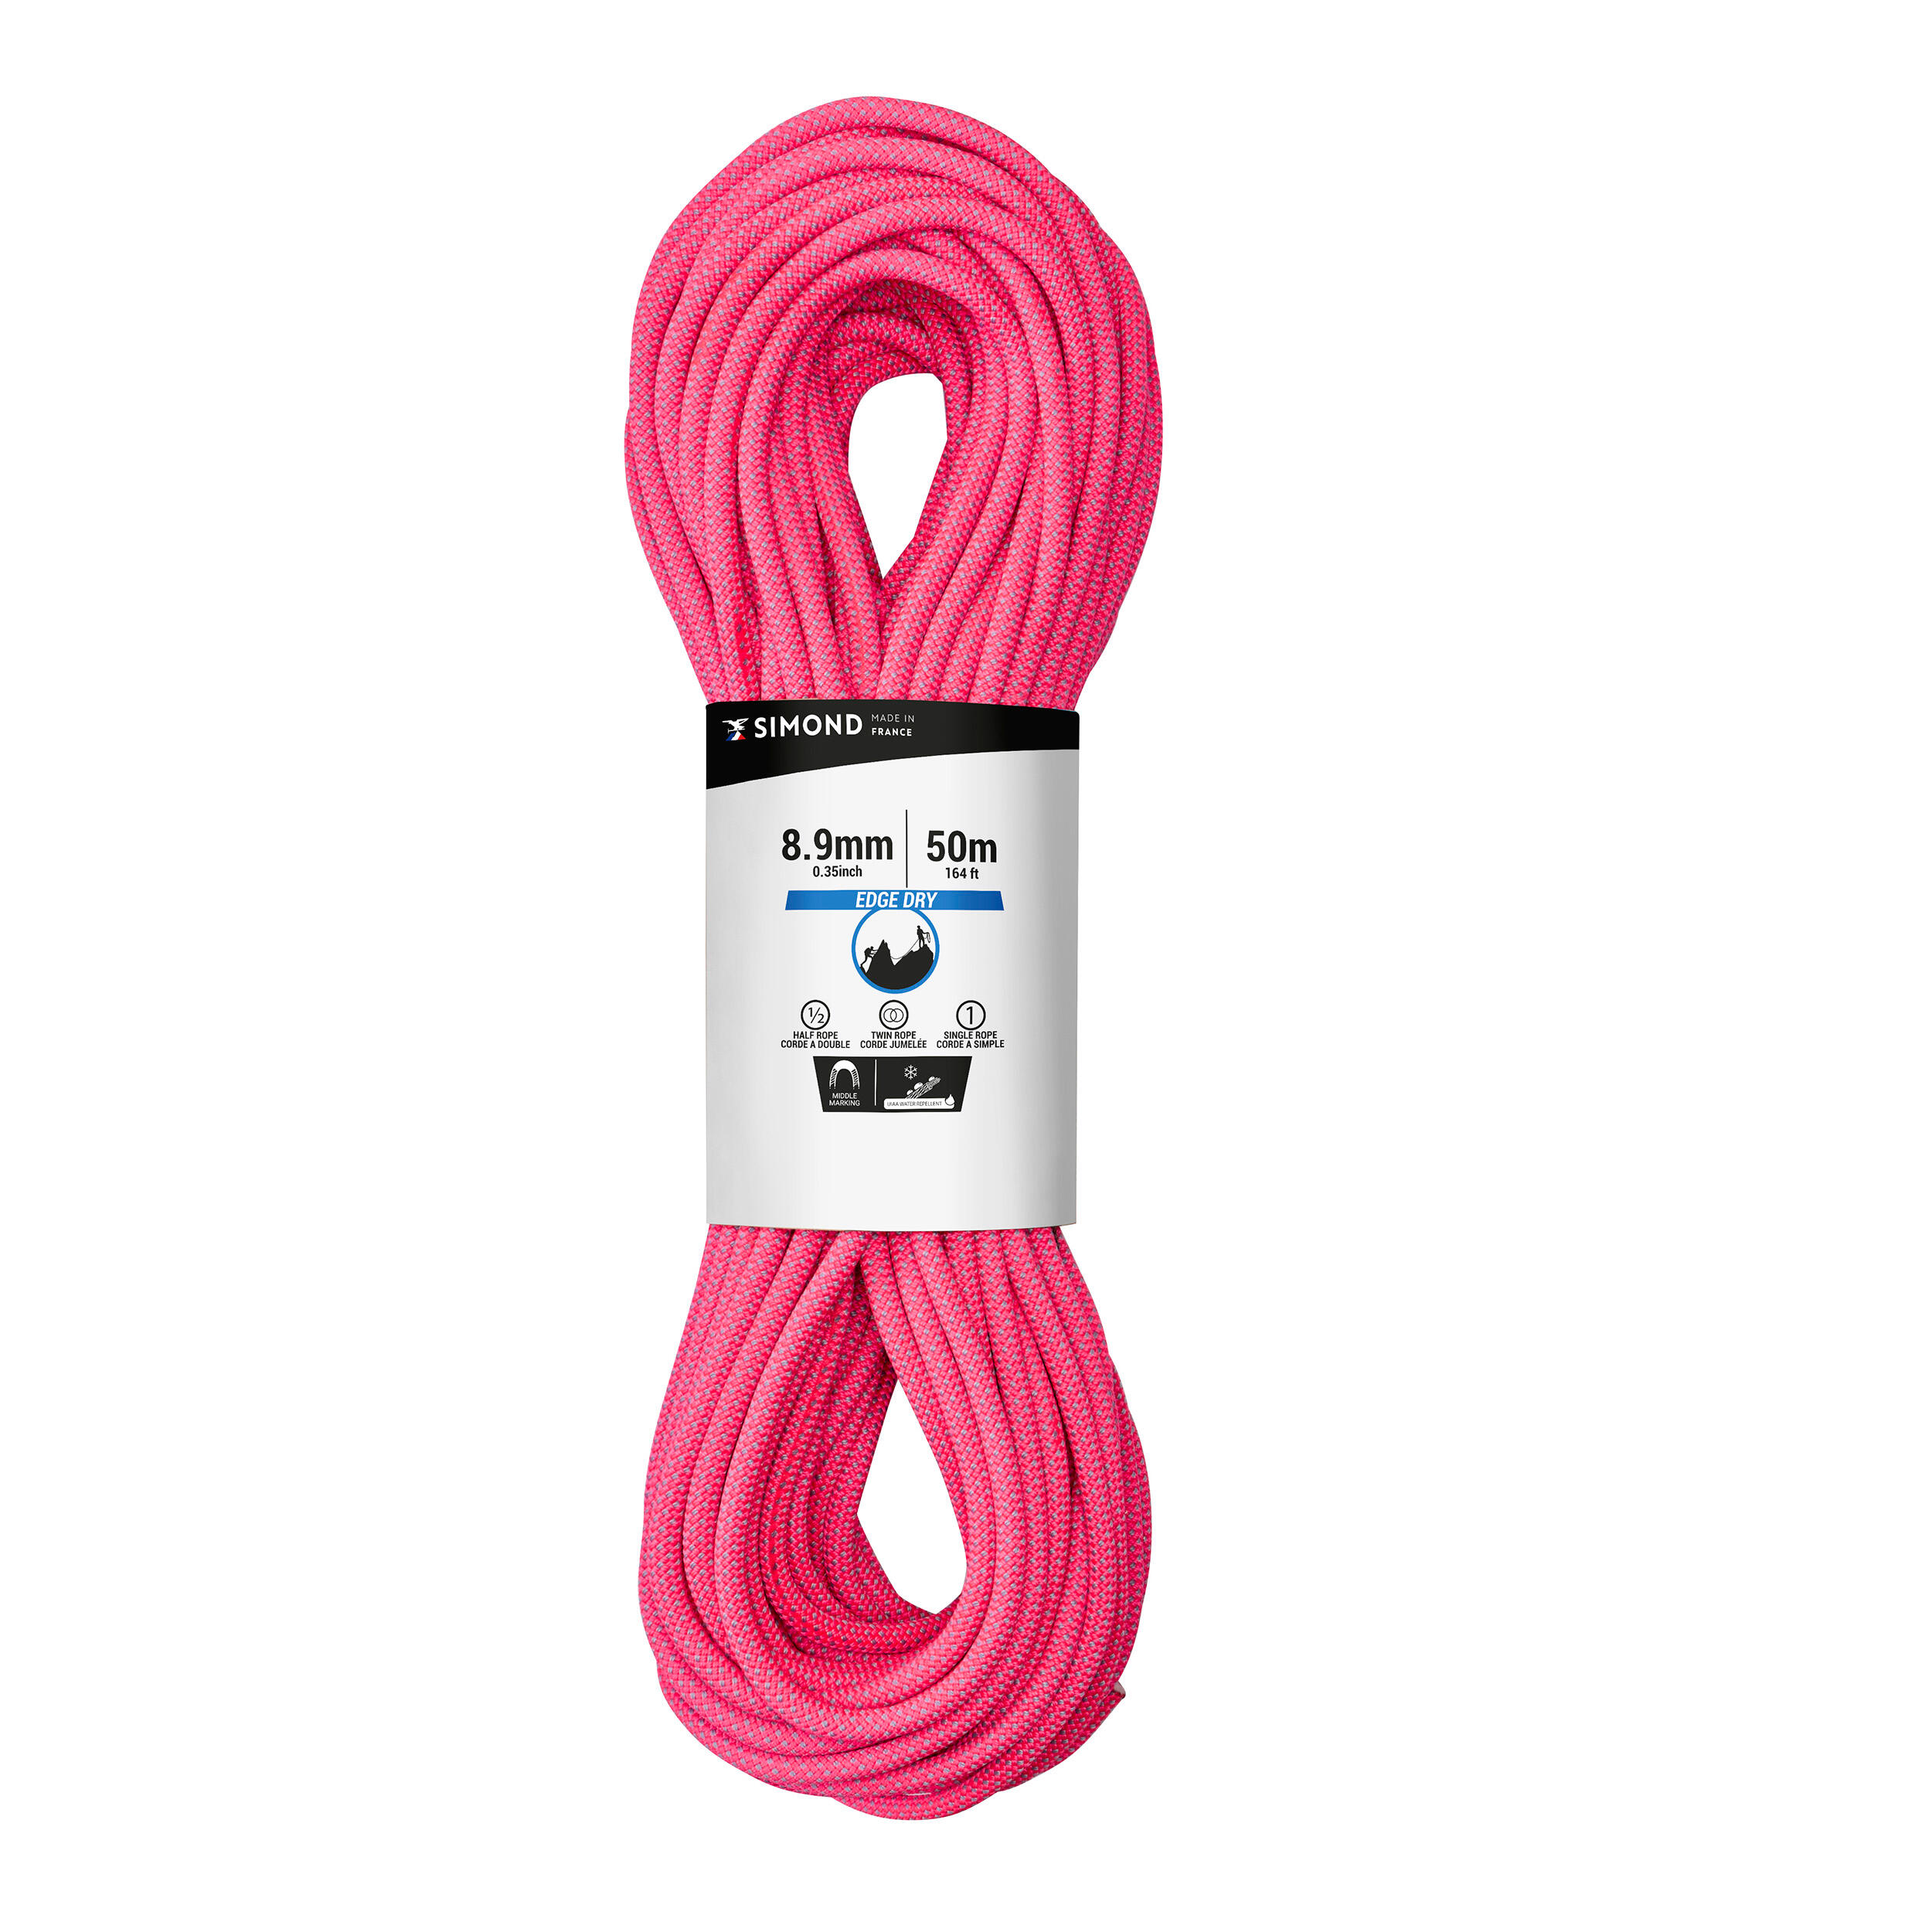 TRIPLE DRY ROPE STANDARD FOR CLIMBING AND MOUNTAINEERING 8.9mmx50m-EDGE DRY ROSE 1/4